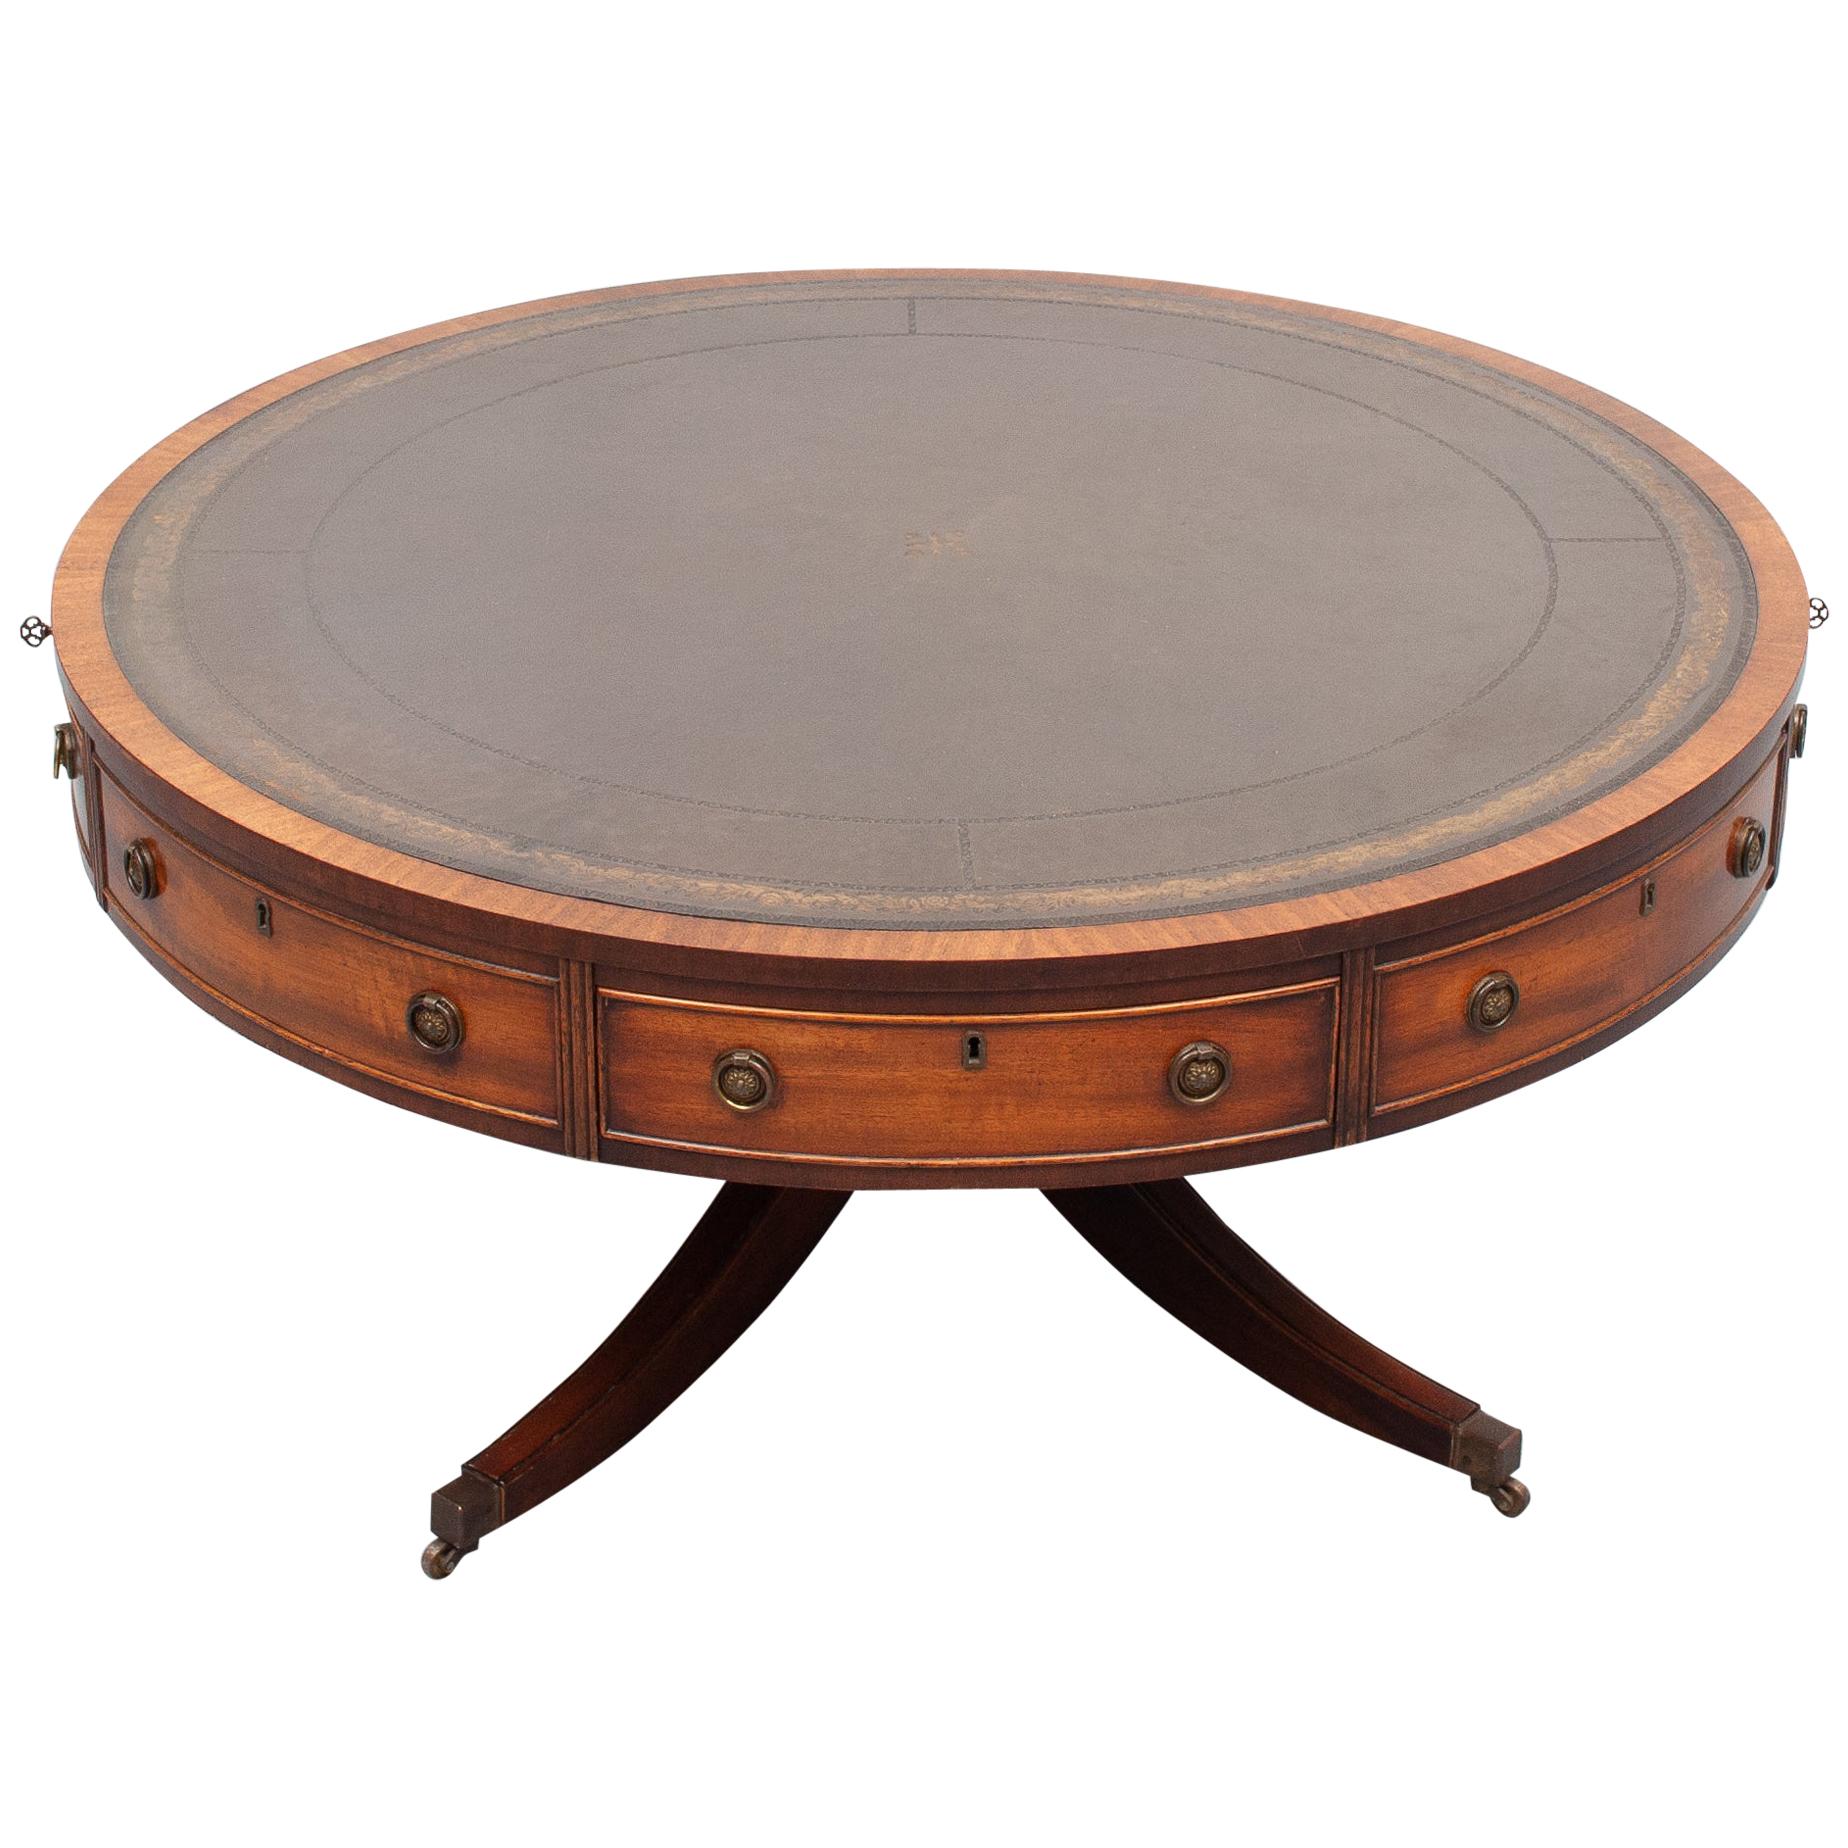 English Bevan Funell   Reprodux  Leather Top Drum Table